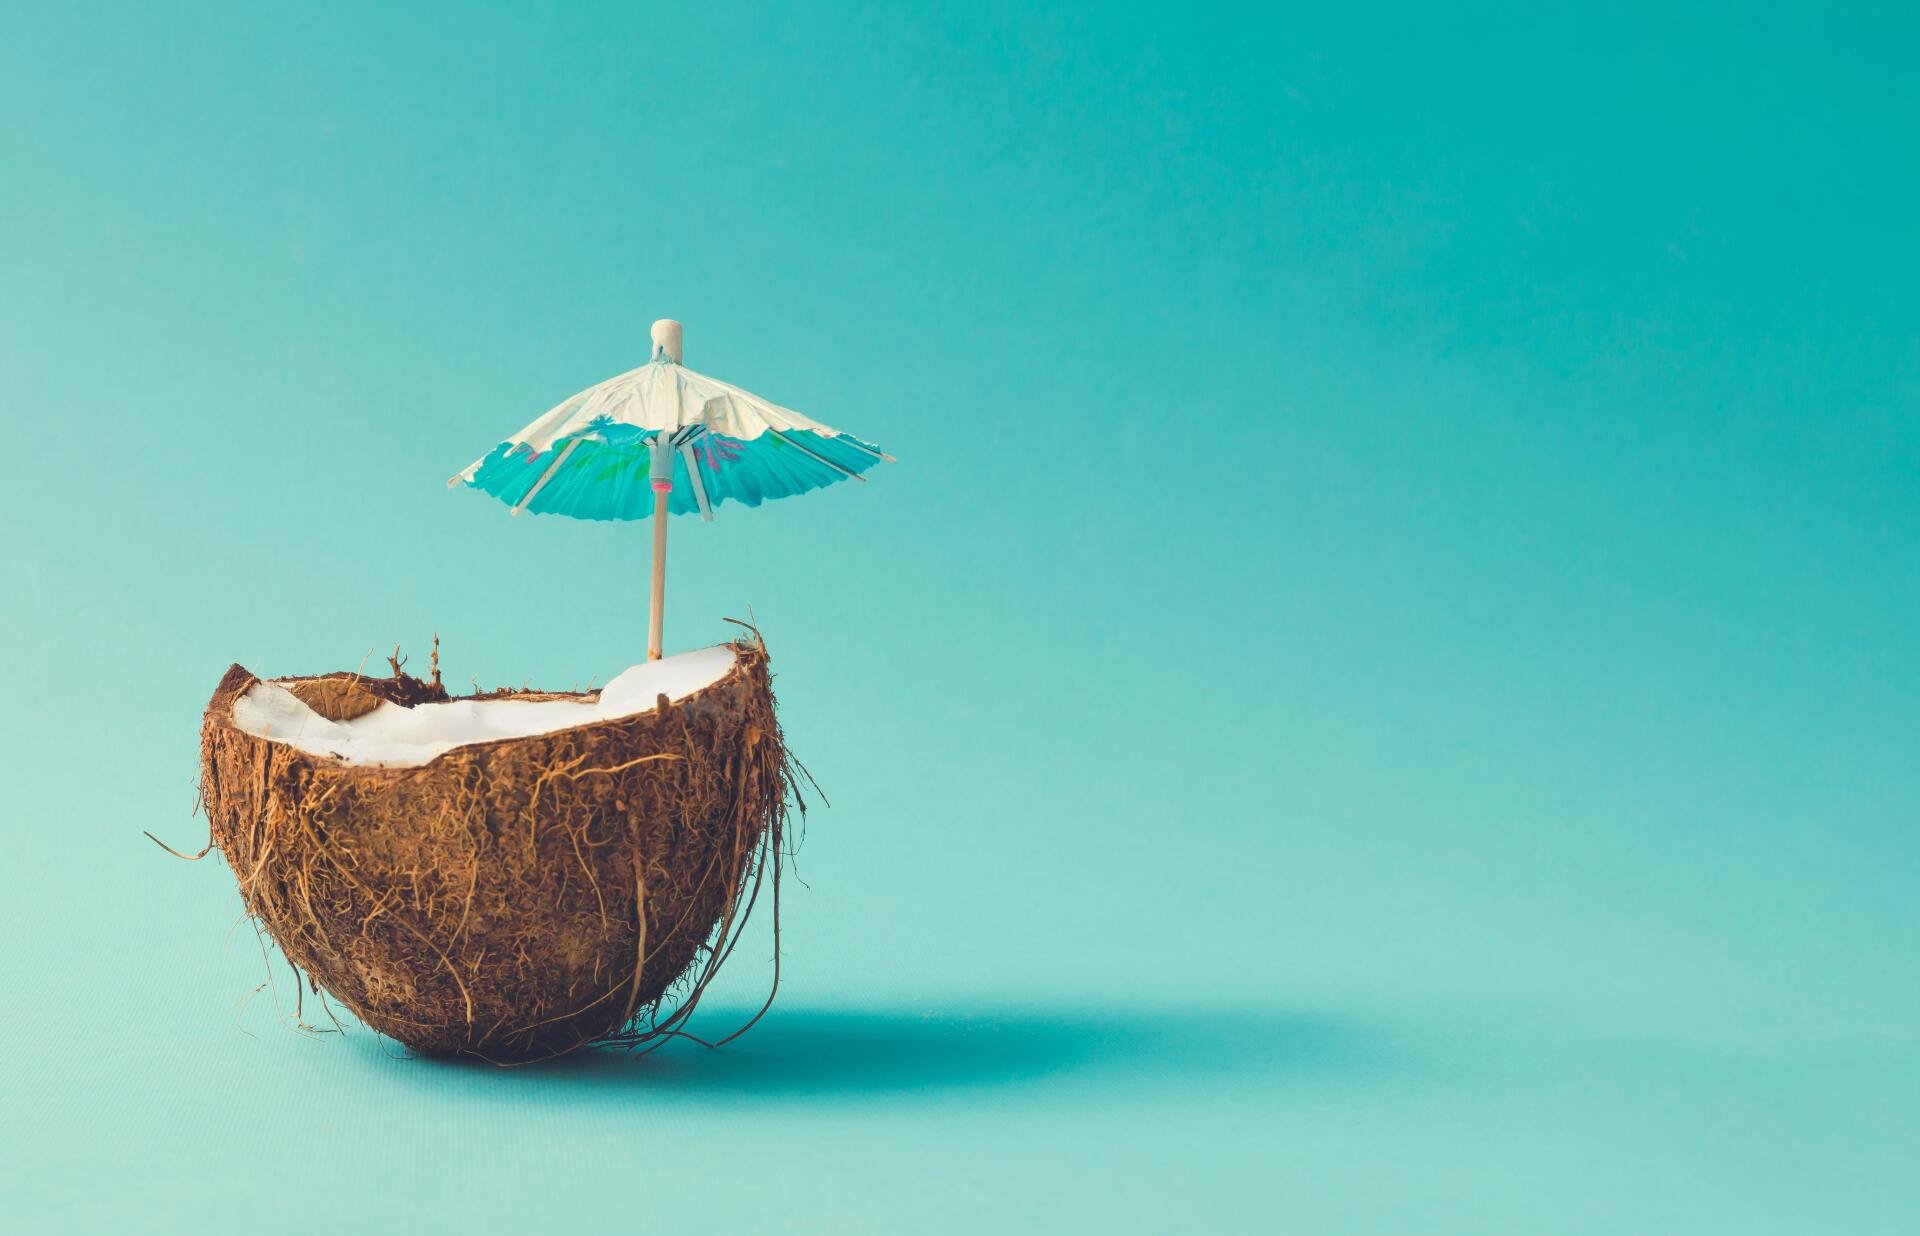 Coconut on a blue background with a umbrella on top